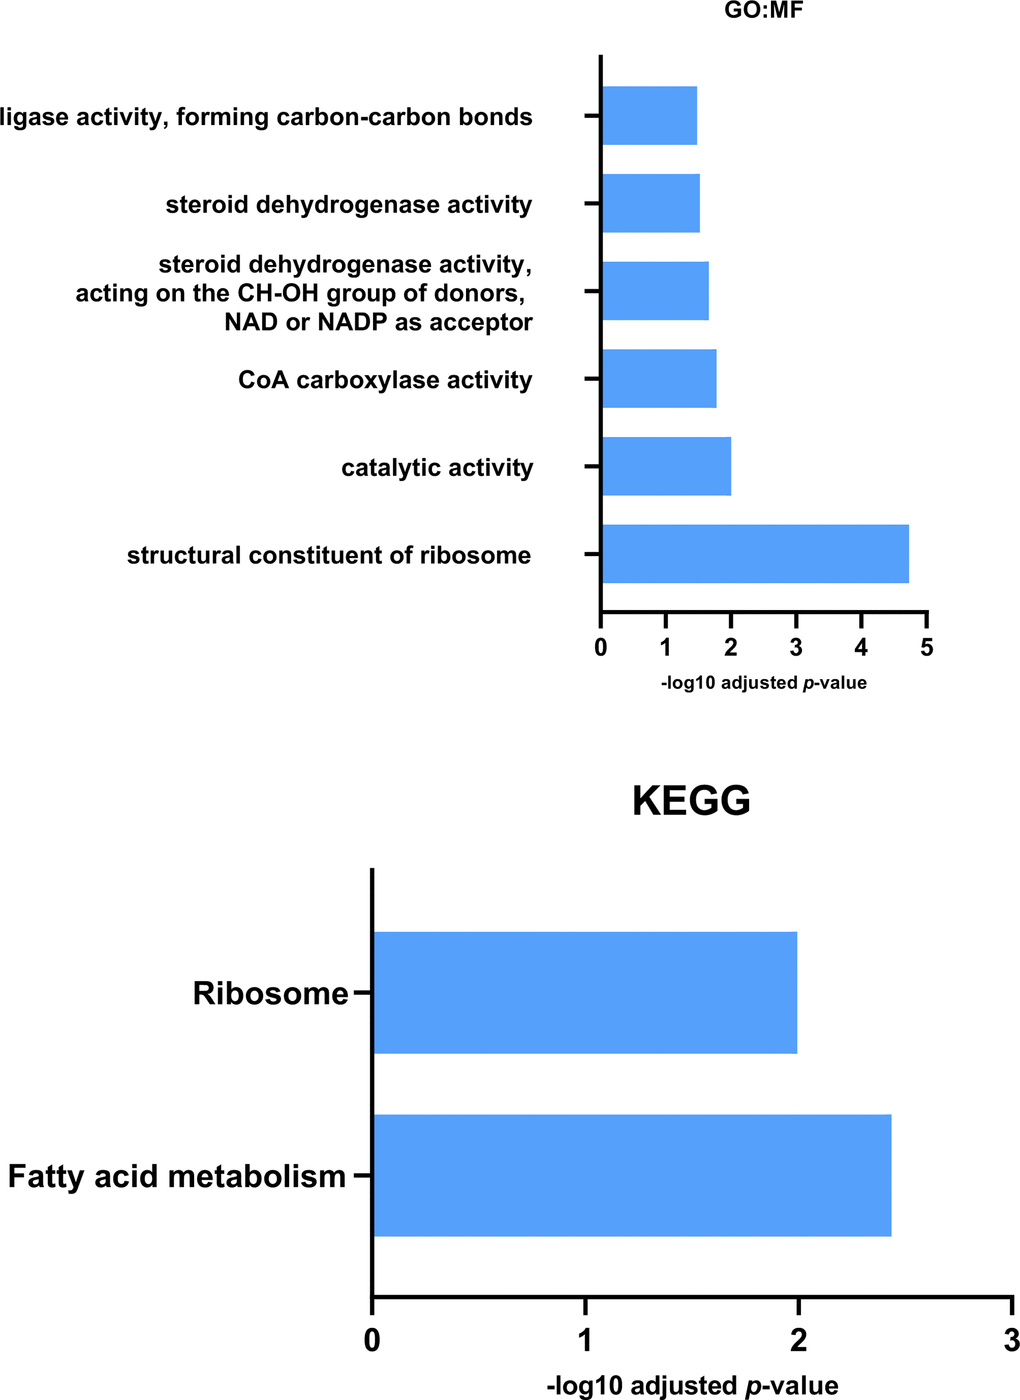 GO: Molecular Function and KEGG analysis for proteins reduced in expression in Pink1- exercised files compared with Pink1- non-exercised files. Both Molecular Function and KEGG enrichment analysis indicated a decrease in expression of fatty acid metabolic proteins in the exercised Pink1- files.